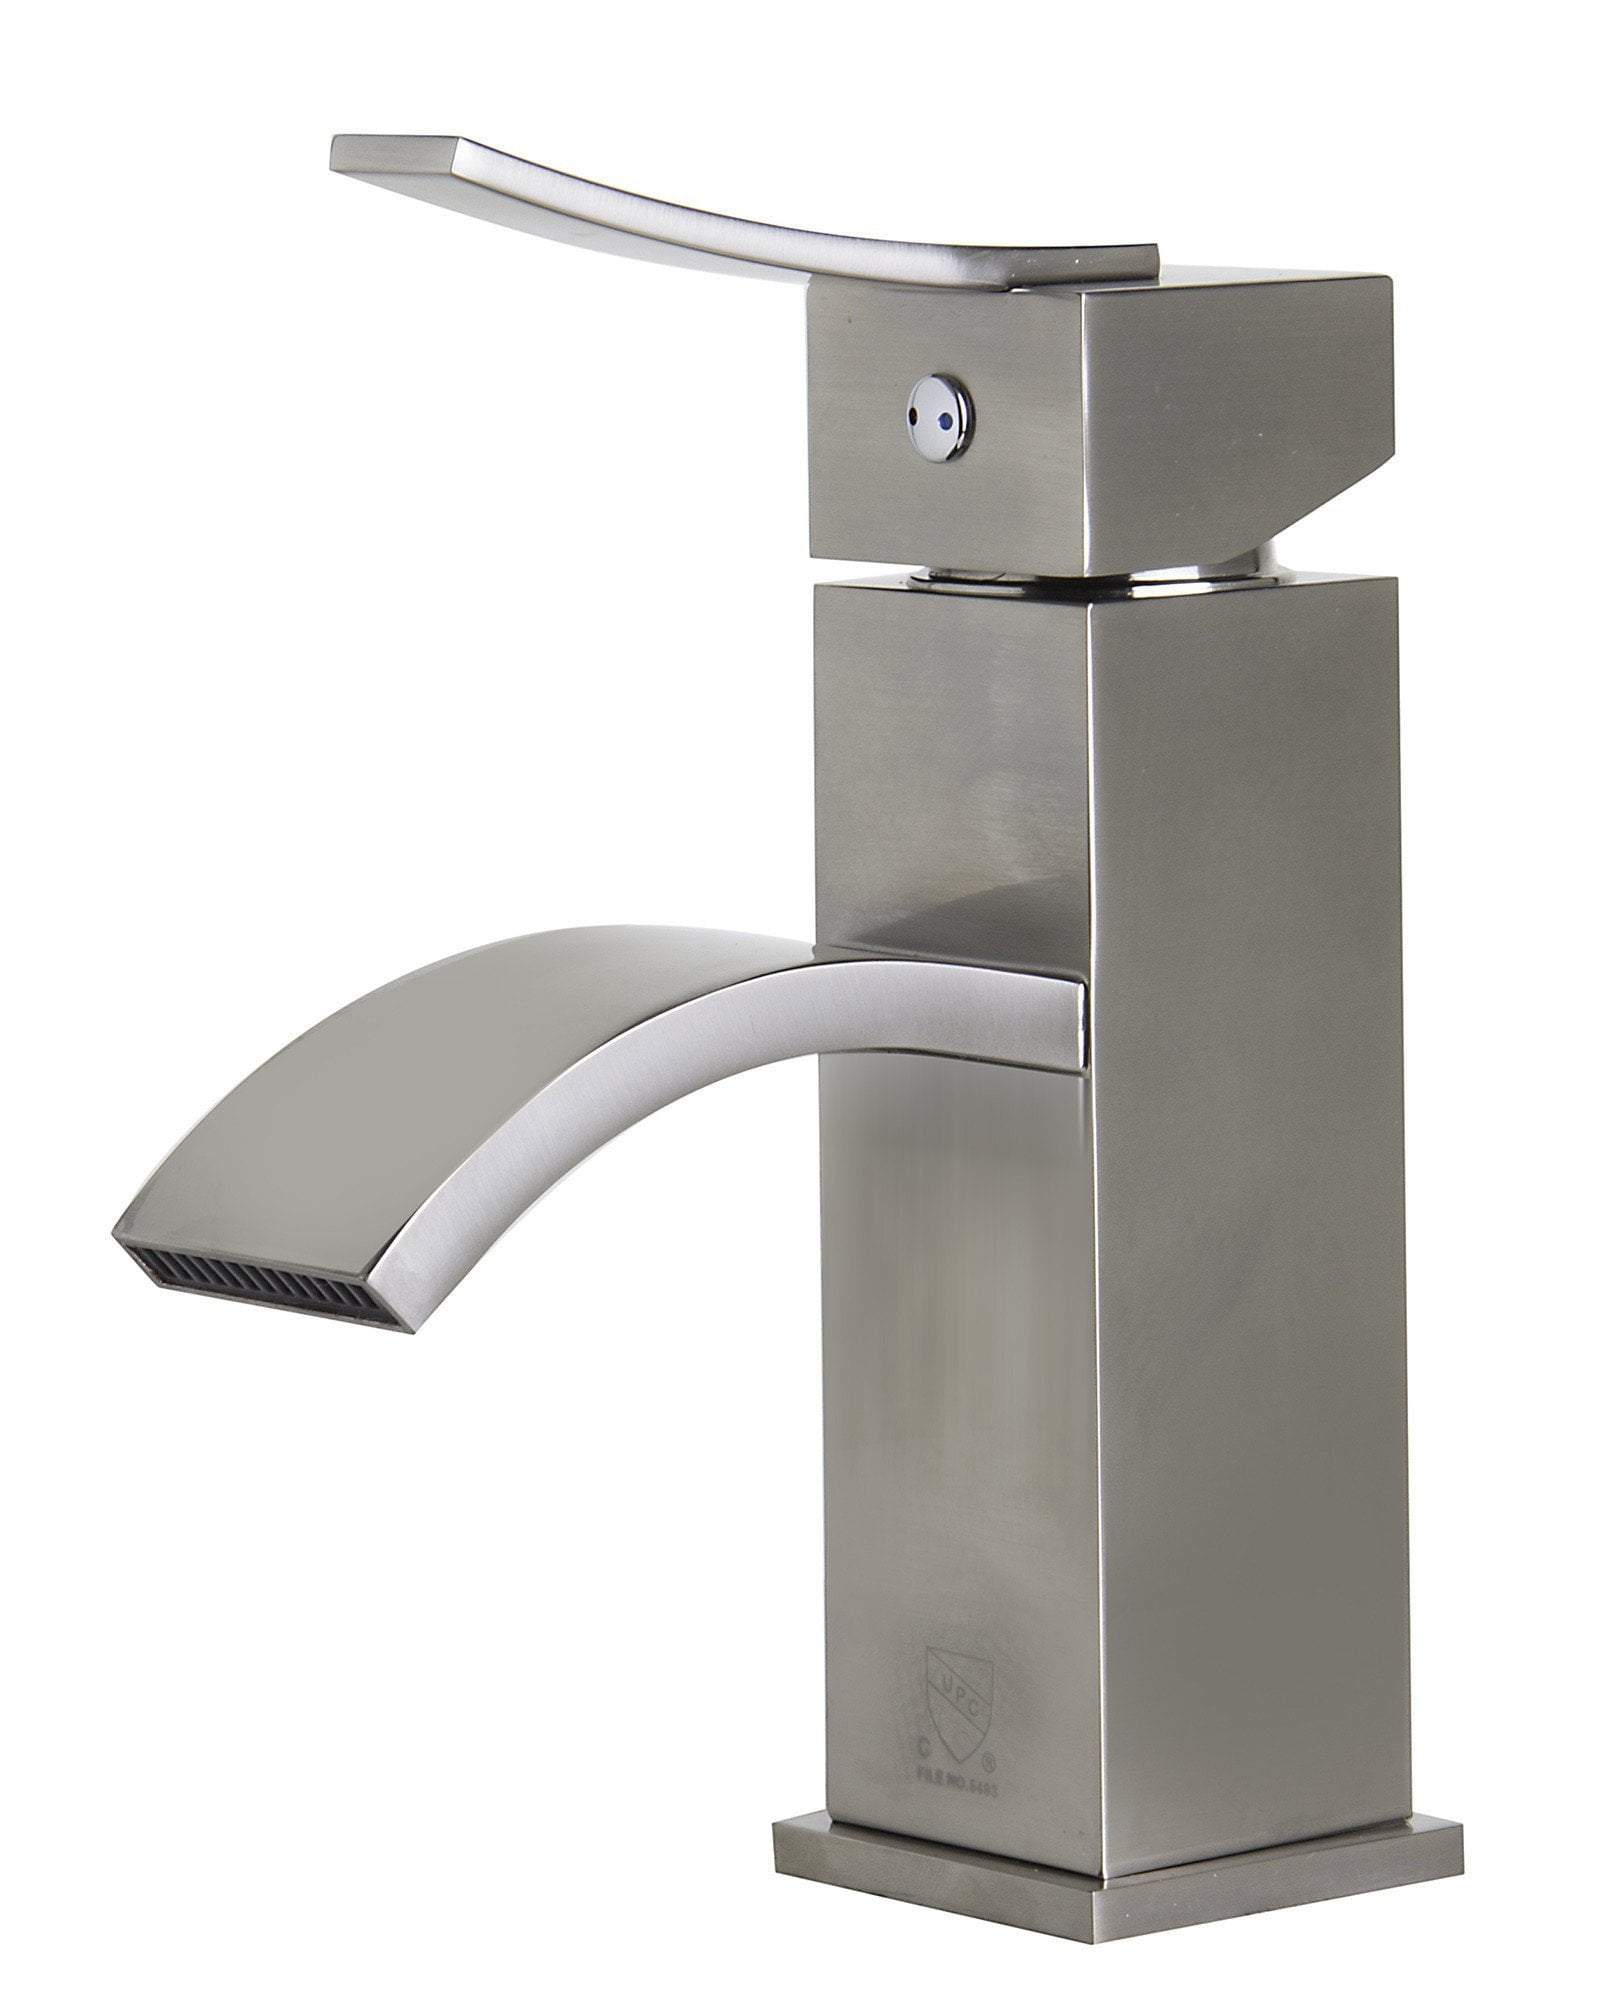 alfi brushed nickel square body curved spout single lever bathroom faucet ab1258 bn